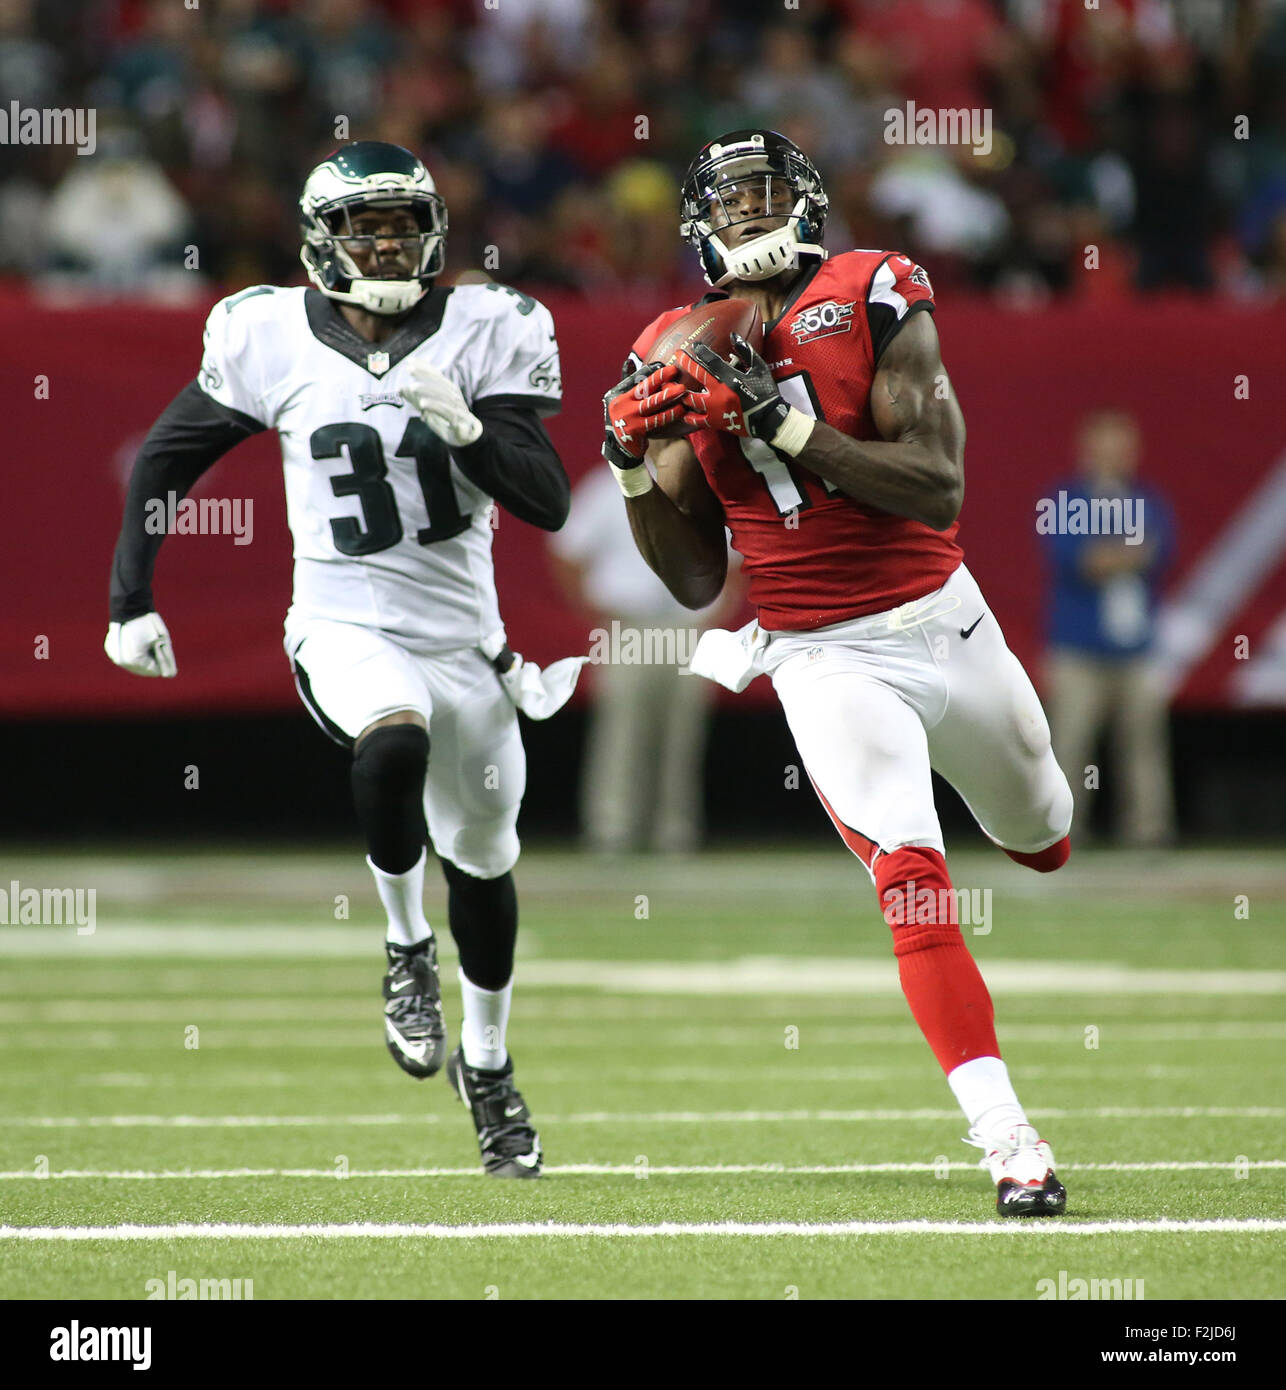 September 14, 2015: #11 Julio Jones of the Atlanta Falcons in action during NFL Monday Night Football game between Philadelphia Eagles and Atlanta Falcons in the Georgia Dome in Atlanta Georgia. The Atlanta Falcons won the game 26-24. Butch Liddell/CSM Stock Photo